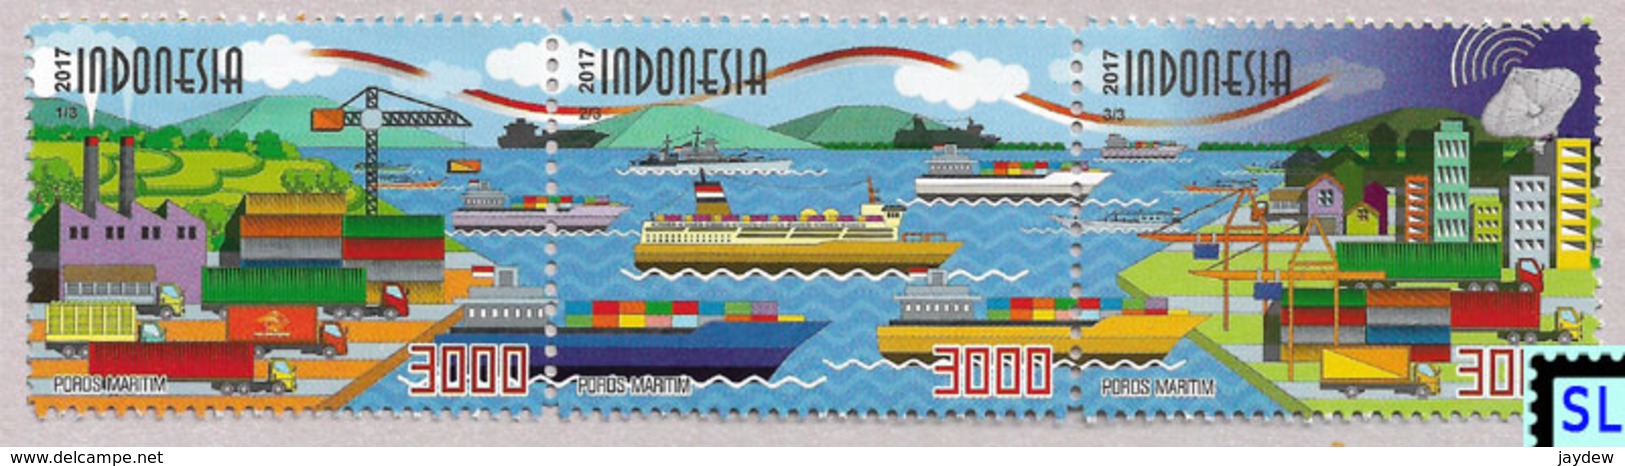 Indonesia Stamps 2017, Towards Vision 2045 Development Program, Ship, Ships, MNH - Indonesia